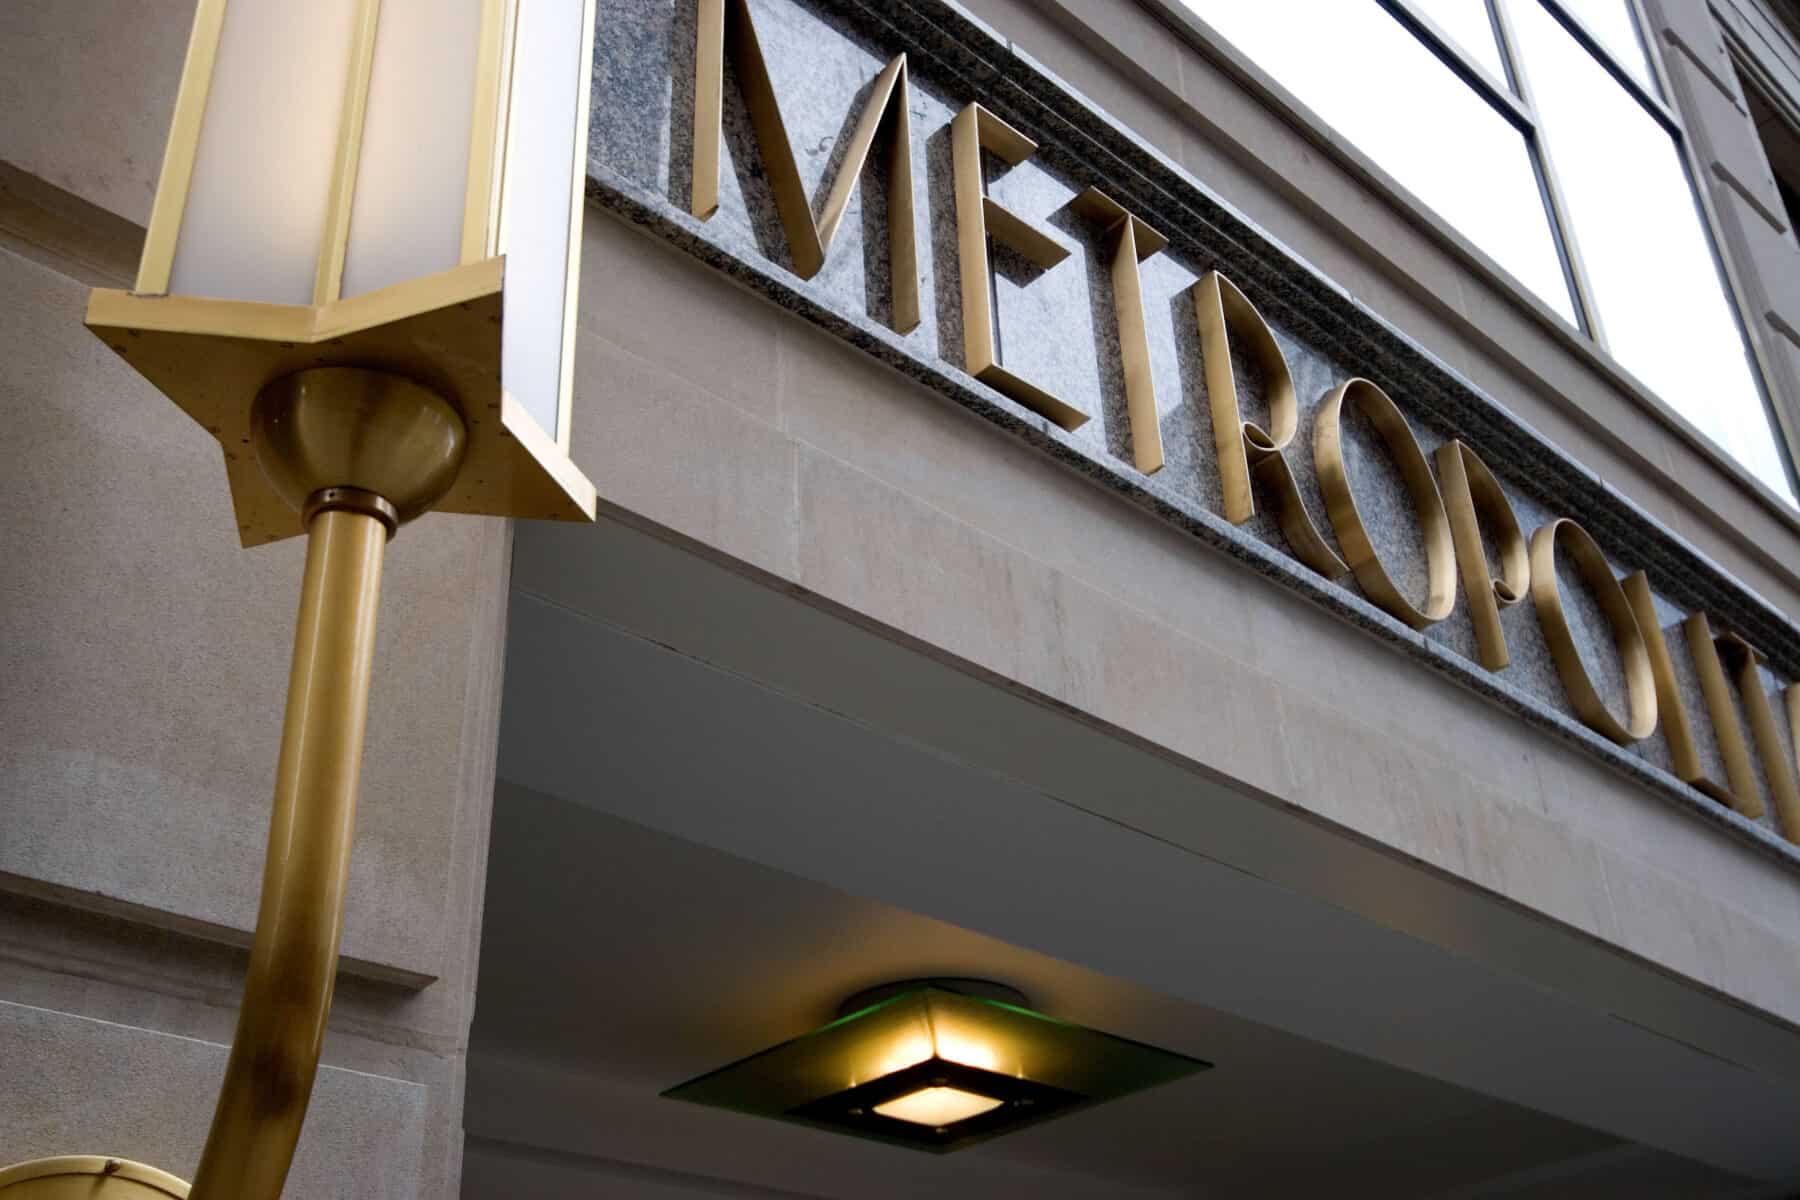 Custom Metal Fabrication of Signage and Entrance of Metropolitan Building from Construction Specialty Projects by Commercial Builder & General Contractor Structural Enterprises